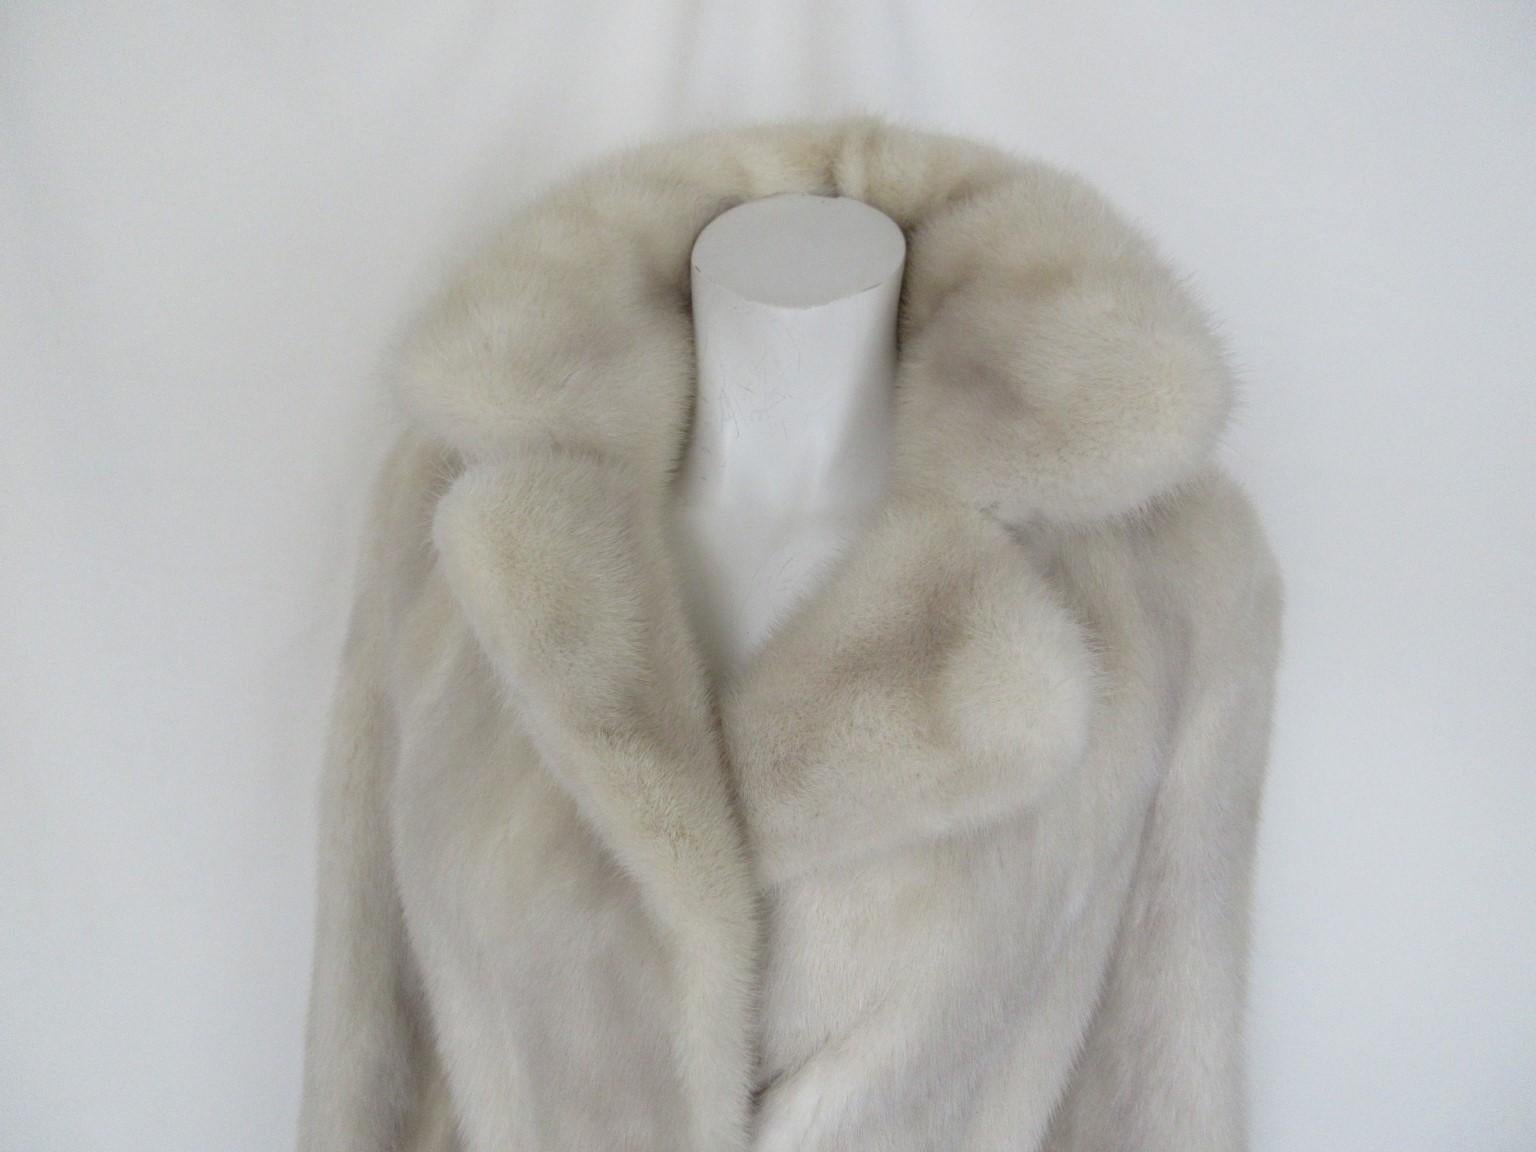 This exclusive vintage mink fur coat is made from naturel mink fur,
which is rare to find.

We offer more exclusive fur and vintage items, view our frontstore

Details:
Color: crème/white/greyish
With 2 silk pockets, 3 closing hooks
and 1 inside